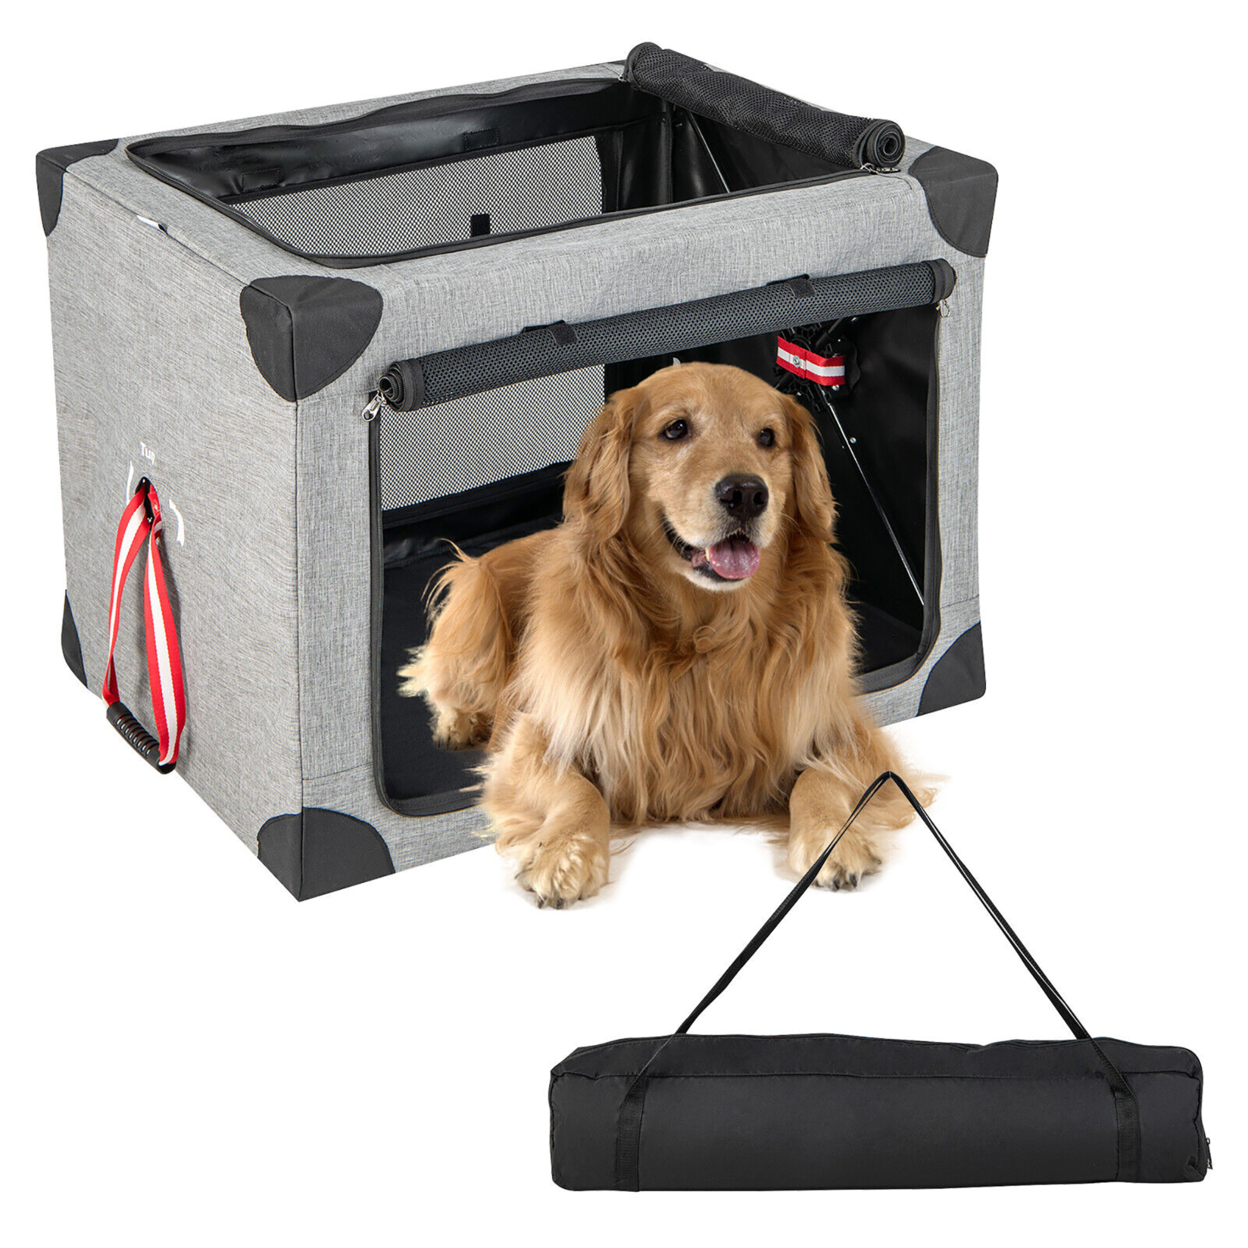 26/32/37 In Portable Folding Dog Crate W/ Mesh Mat & Locking Zippers For Cat Carrier Use - XL